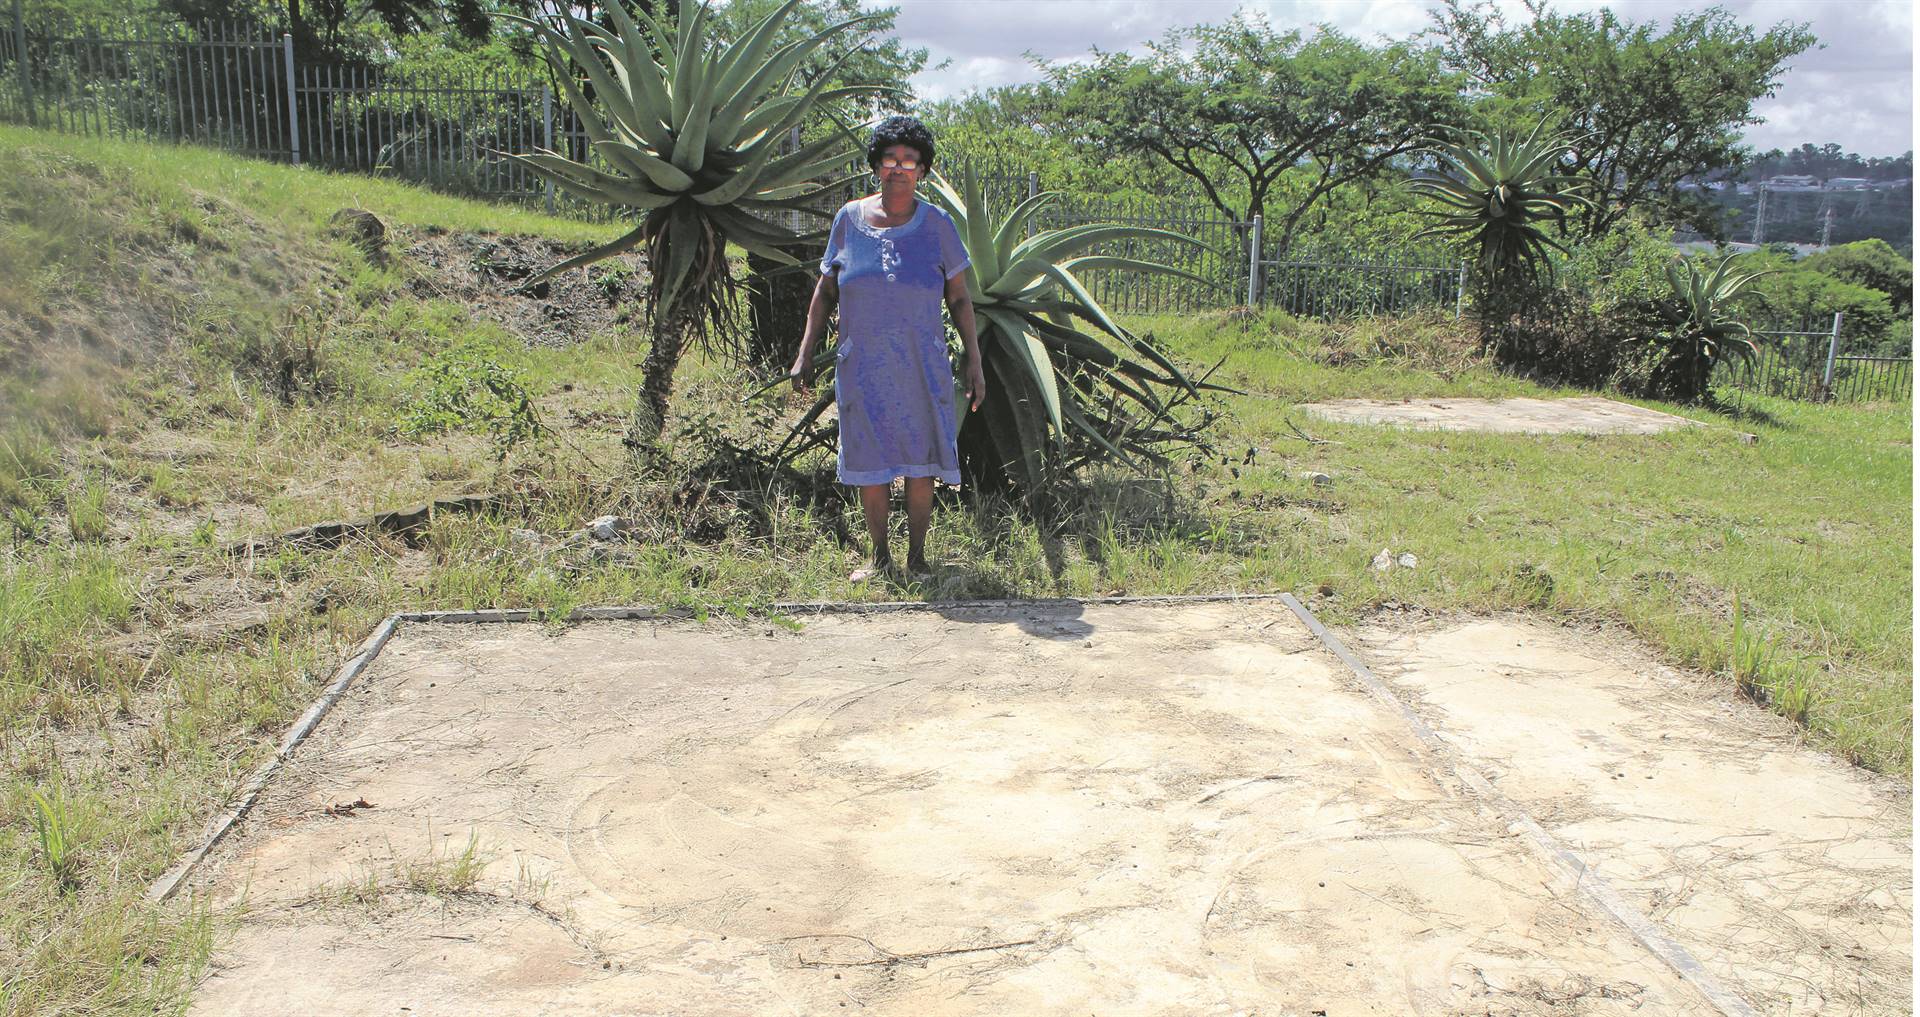 Thuthukile Mabhida, daughter of struggle stalwart Moses Mabhida, stands next to her grandfather’s grave, minus its tombstone, at Heroes Acre in Imbali Township, Pietermaritzburg